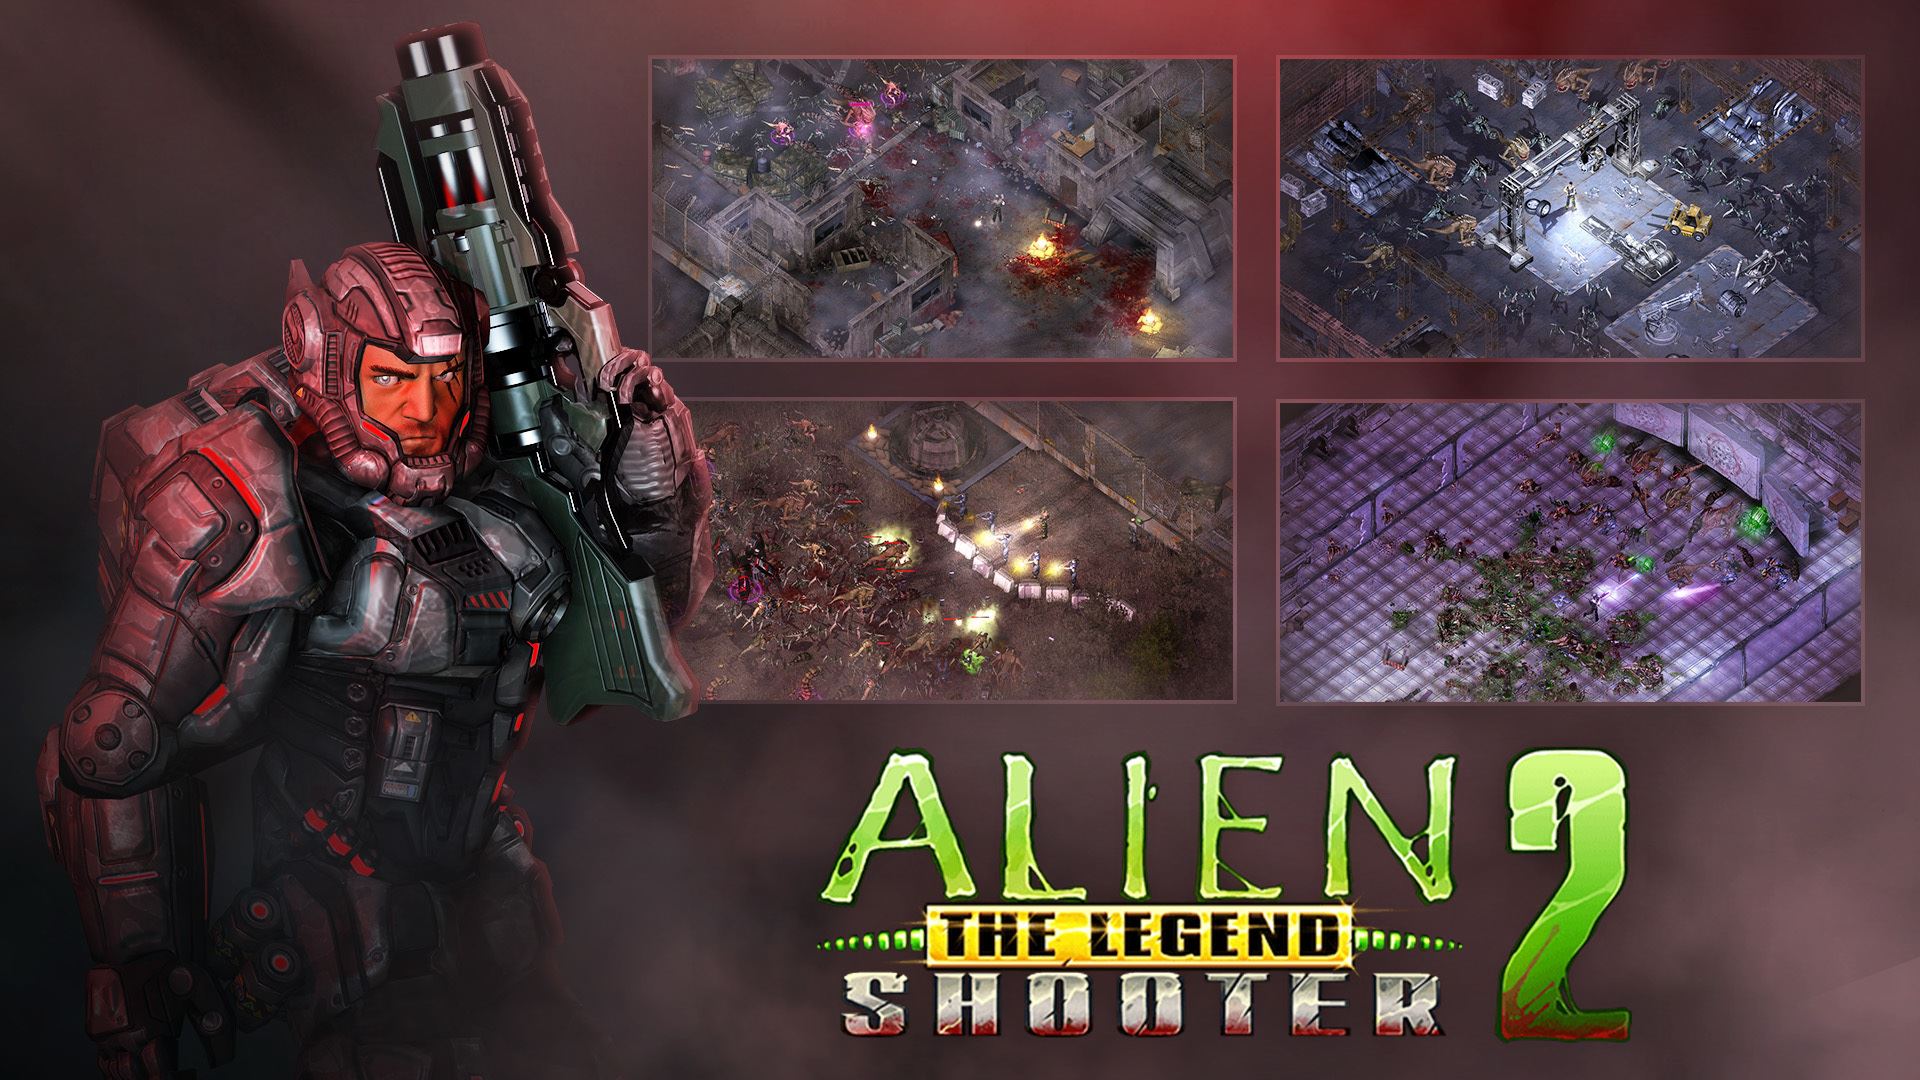 pc games alien shooter 3 free download